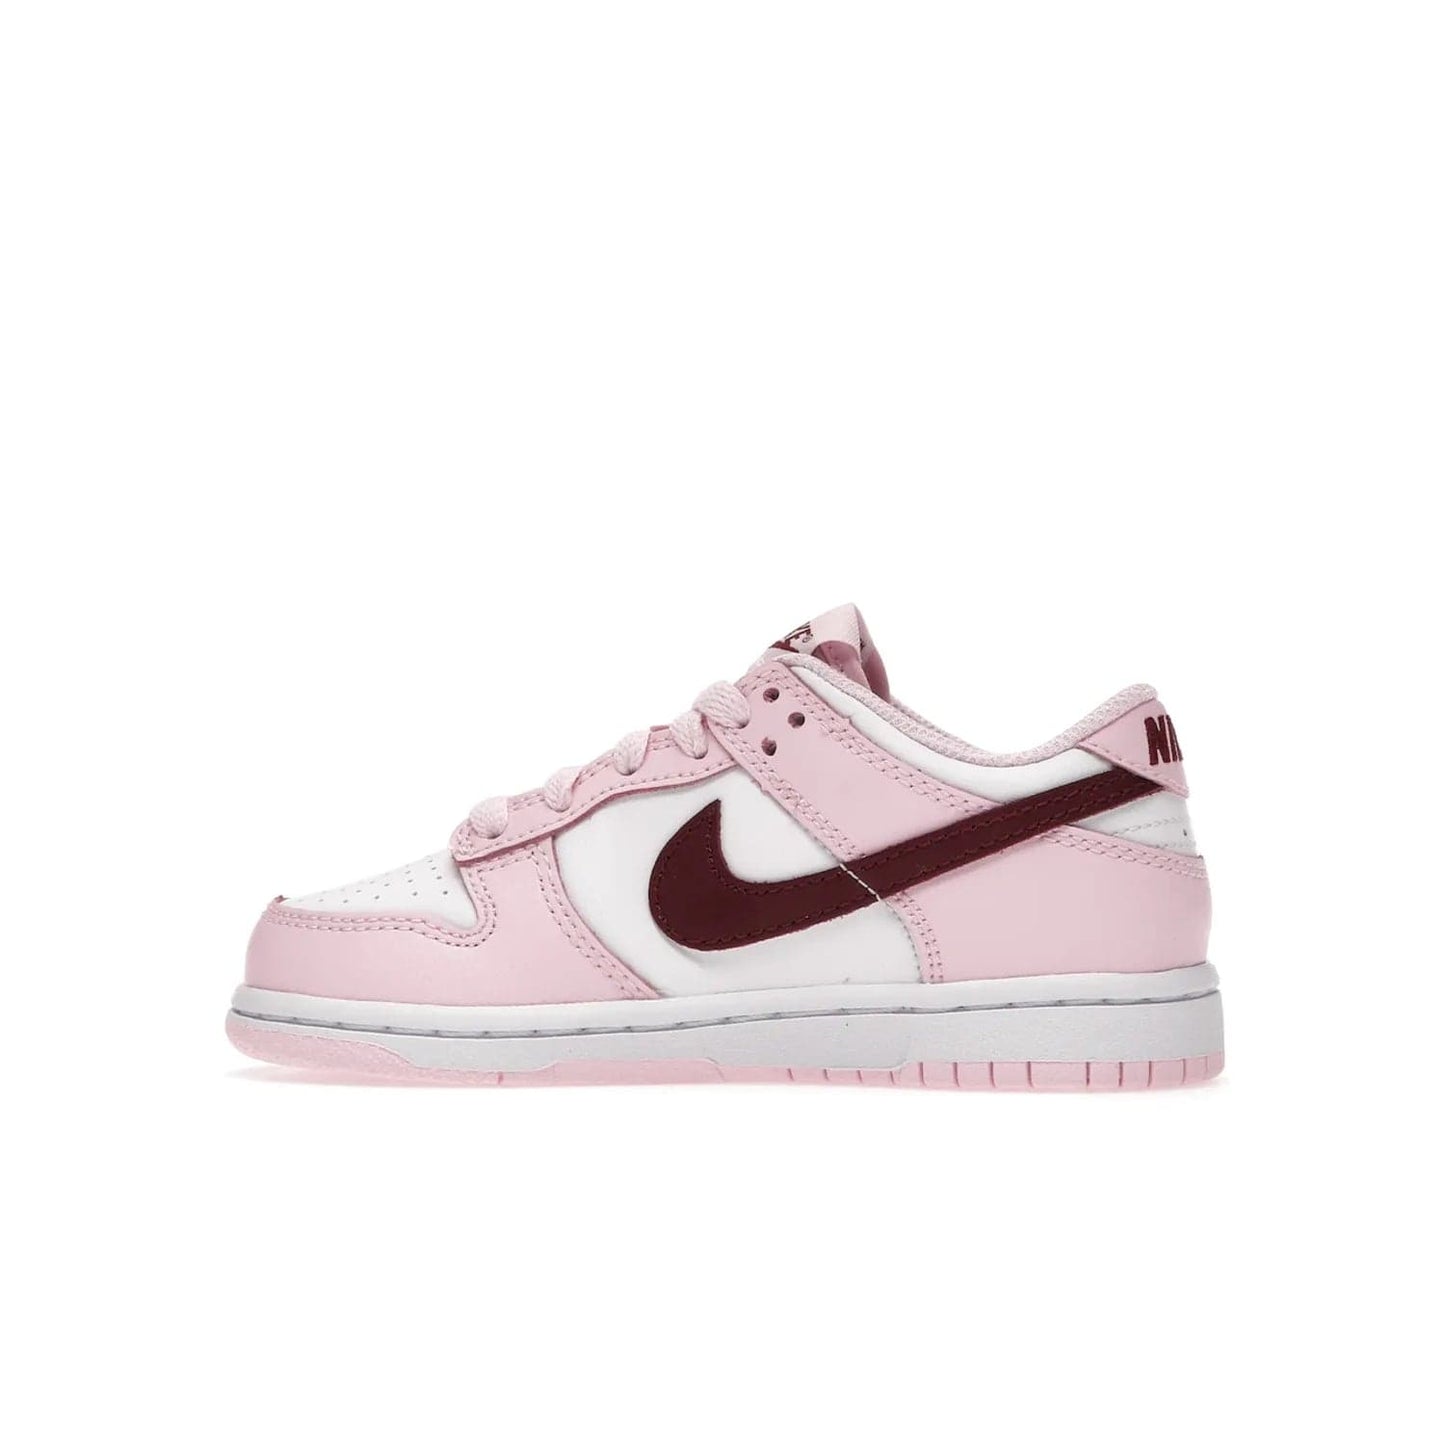 Nike Dunk Low Pink Red White (PS) - Image 20 - Only at www.BallersClubKickz.com - Introducing the Nike Dunk Low Pink Red White (PS), the perfect addition to your sneaker collection. A classic silhouette with modern vibrant colors, including a pink upper with red and white accents and a white midsole. Comfort and durability, perfect for any outfit. Limited edition, available June 22nd.